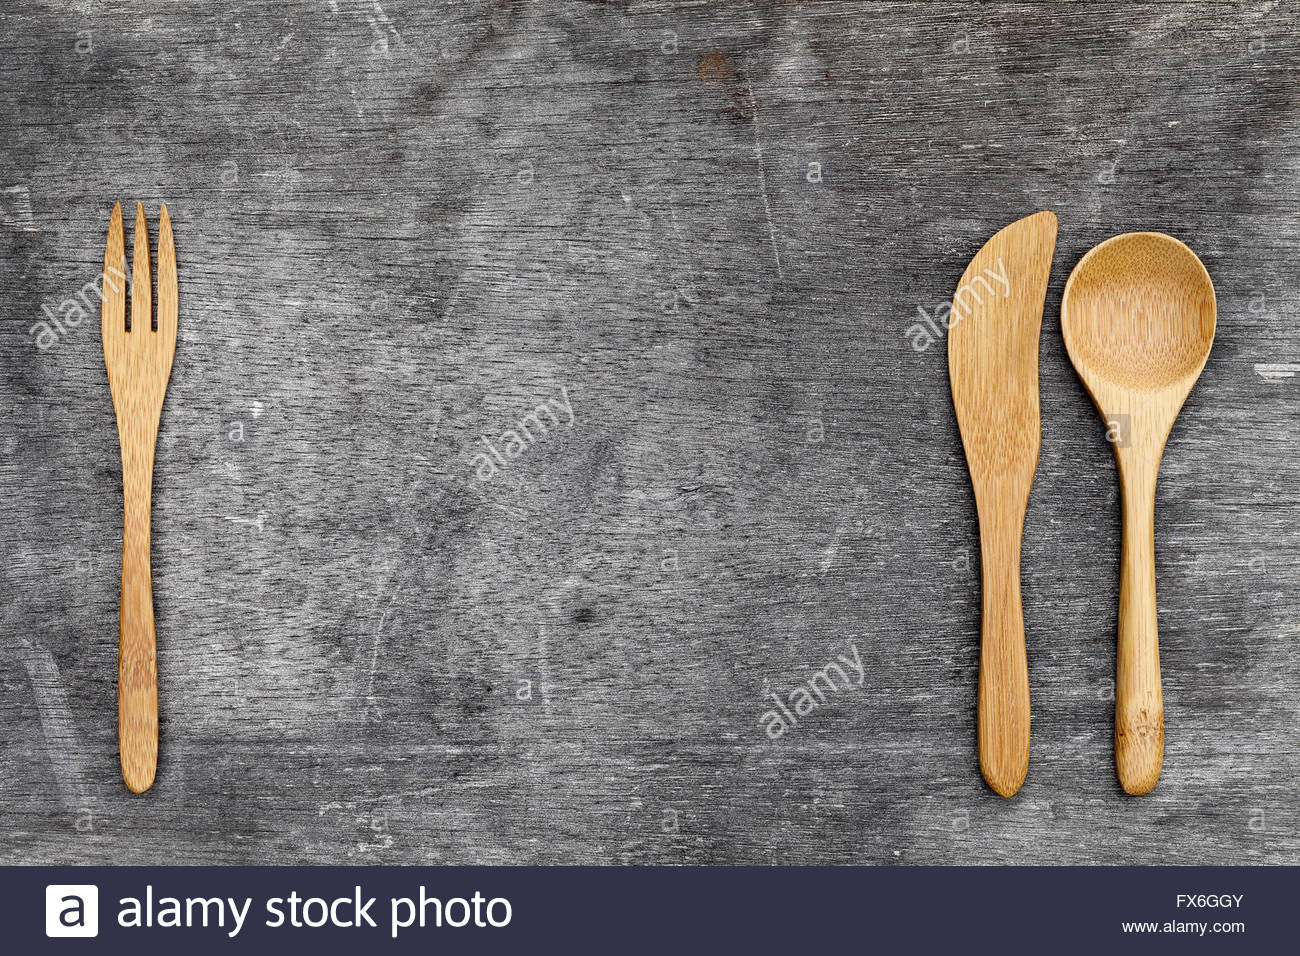 Wooden Spoon And Fork Knife On Grunge Wood Background Stock Photo